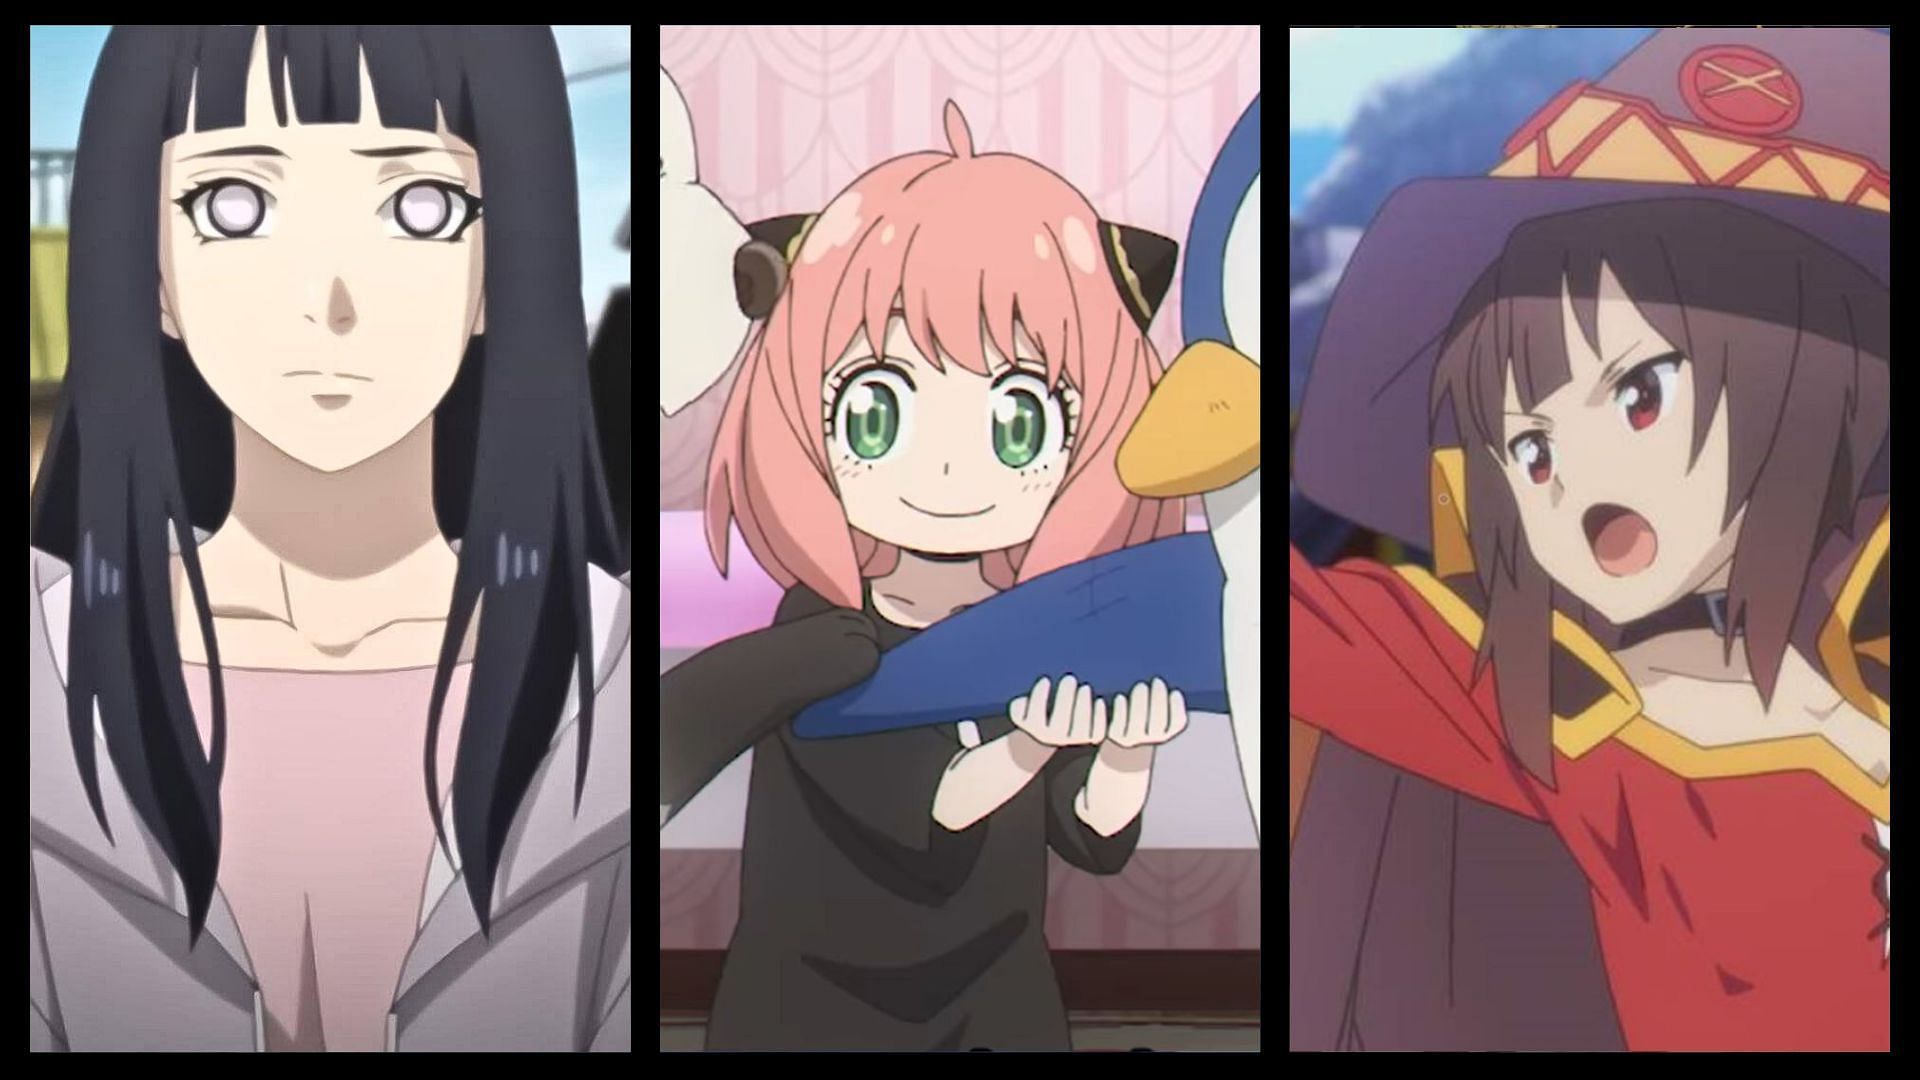 10 cutest anime girls of all time, ranked